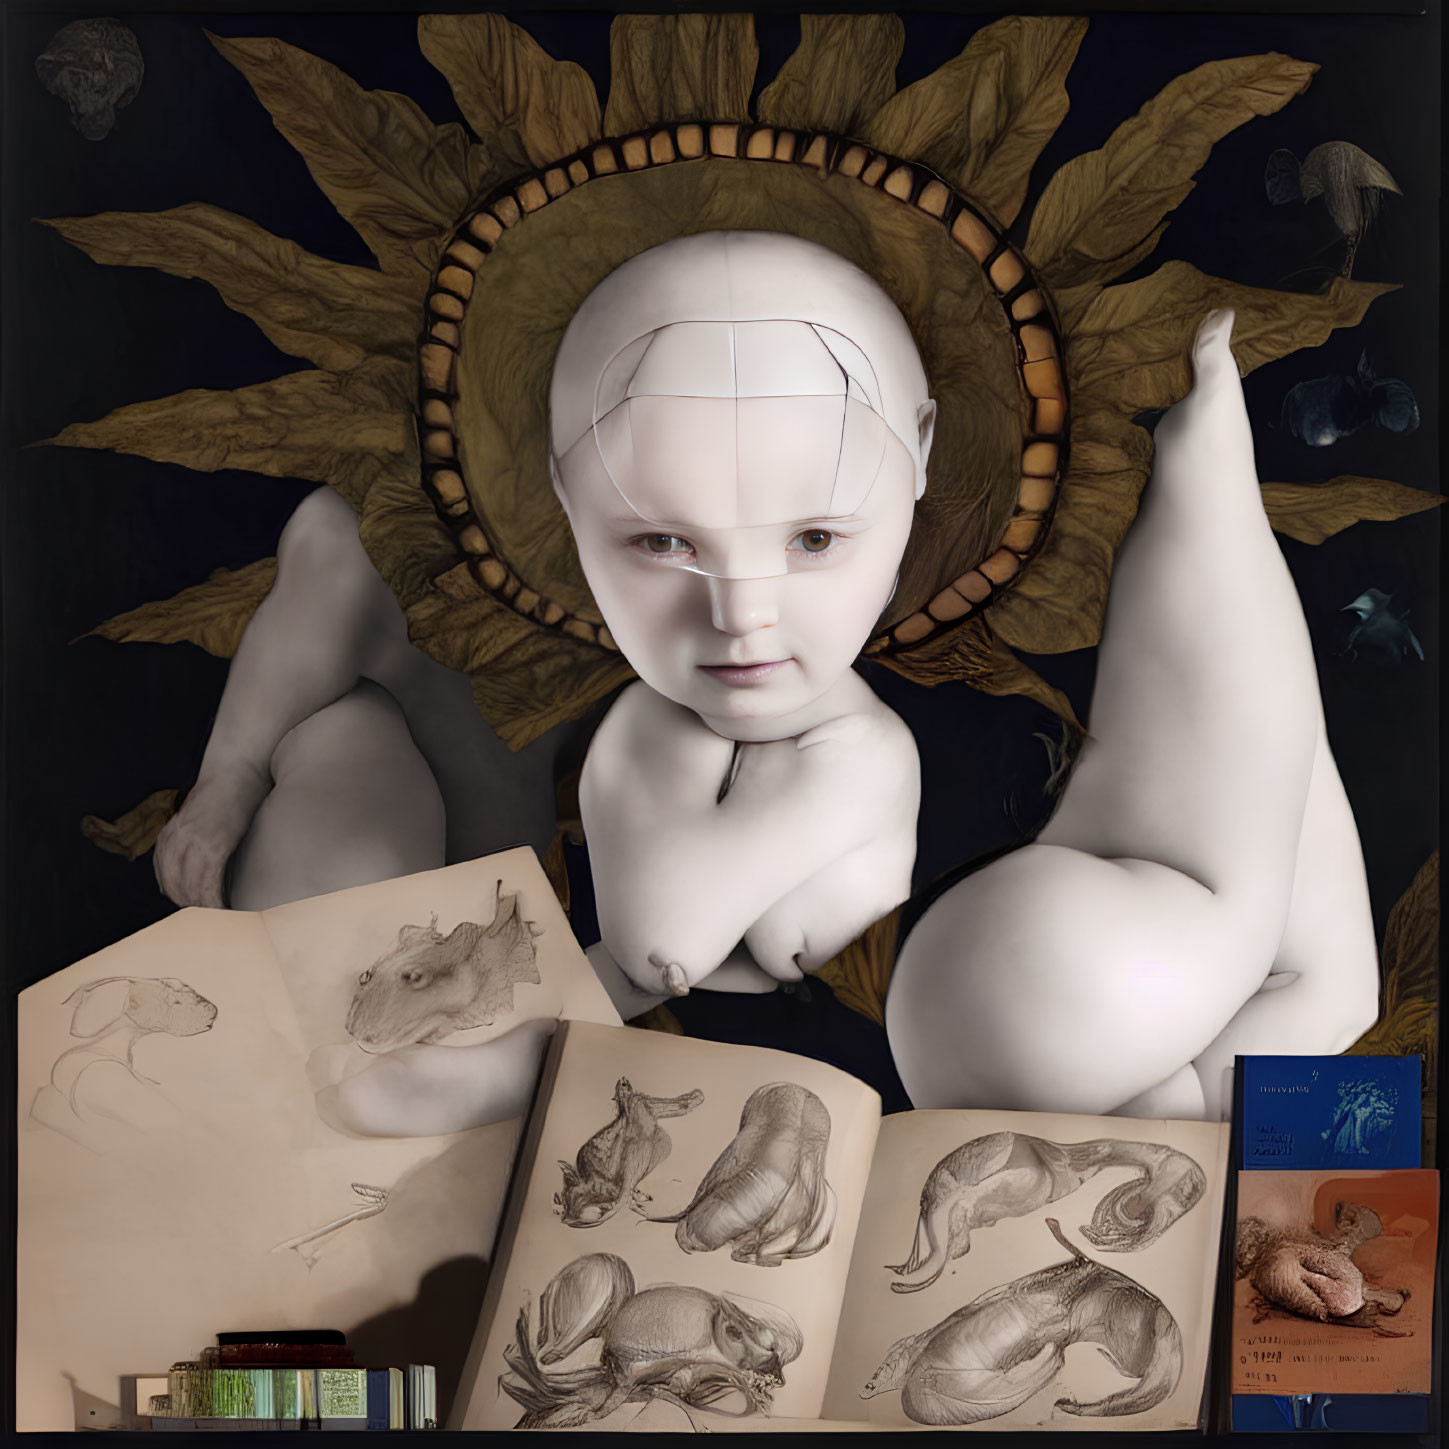 Surreal artwork of pale humanoid with sunflower halo and animal sketches